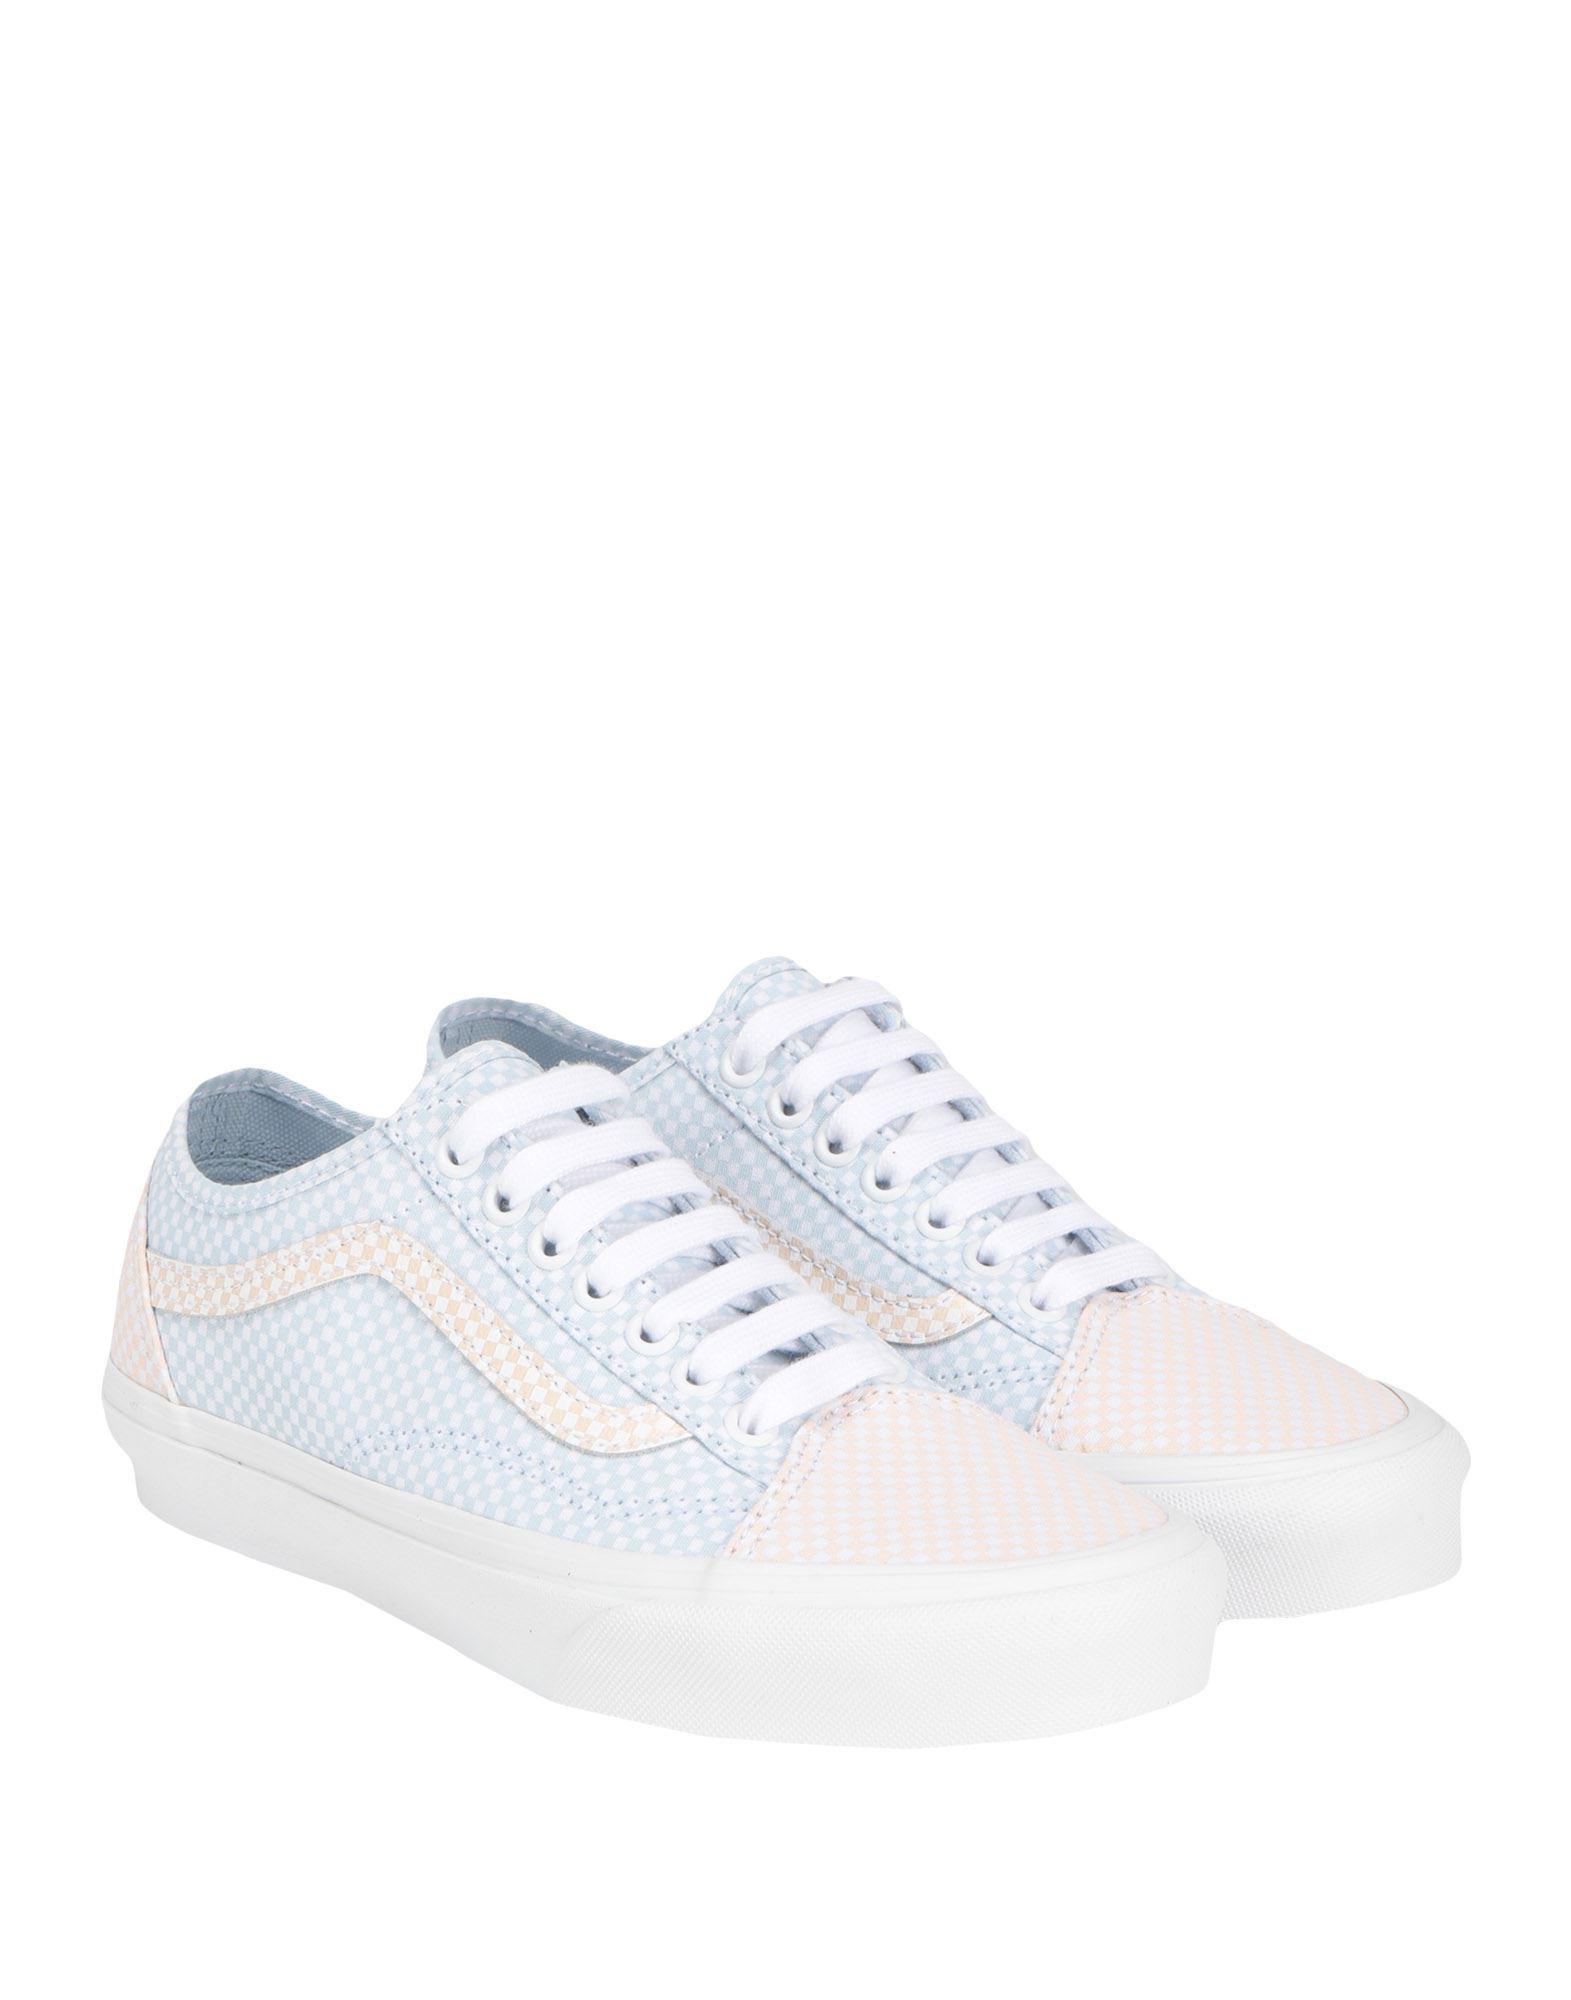 Vans Trainers in Sky Blue (White) - Lyst ابراز